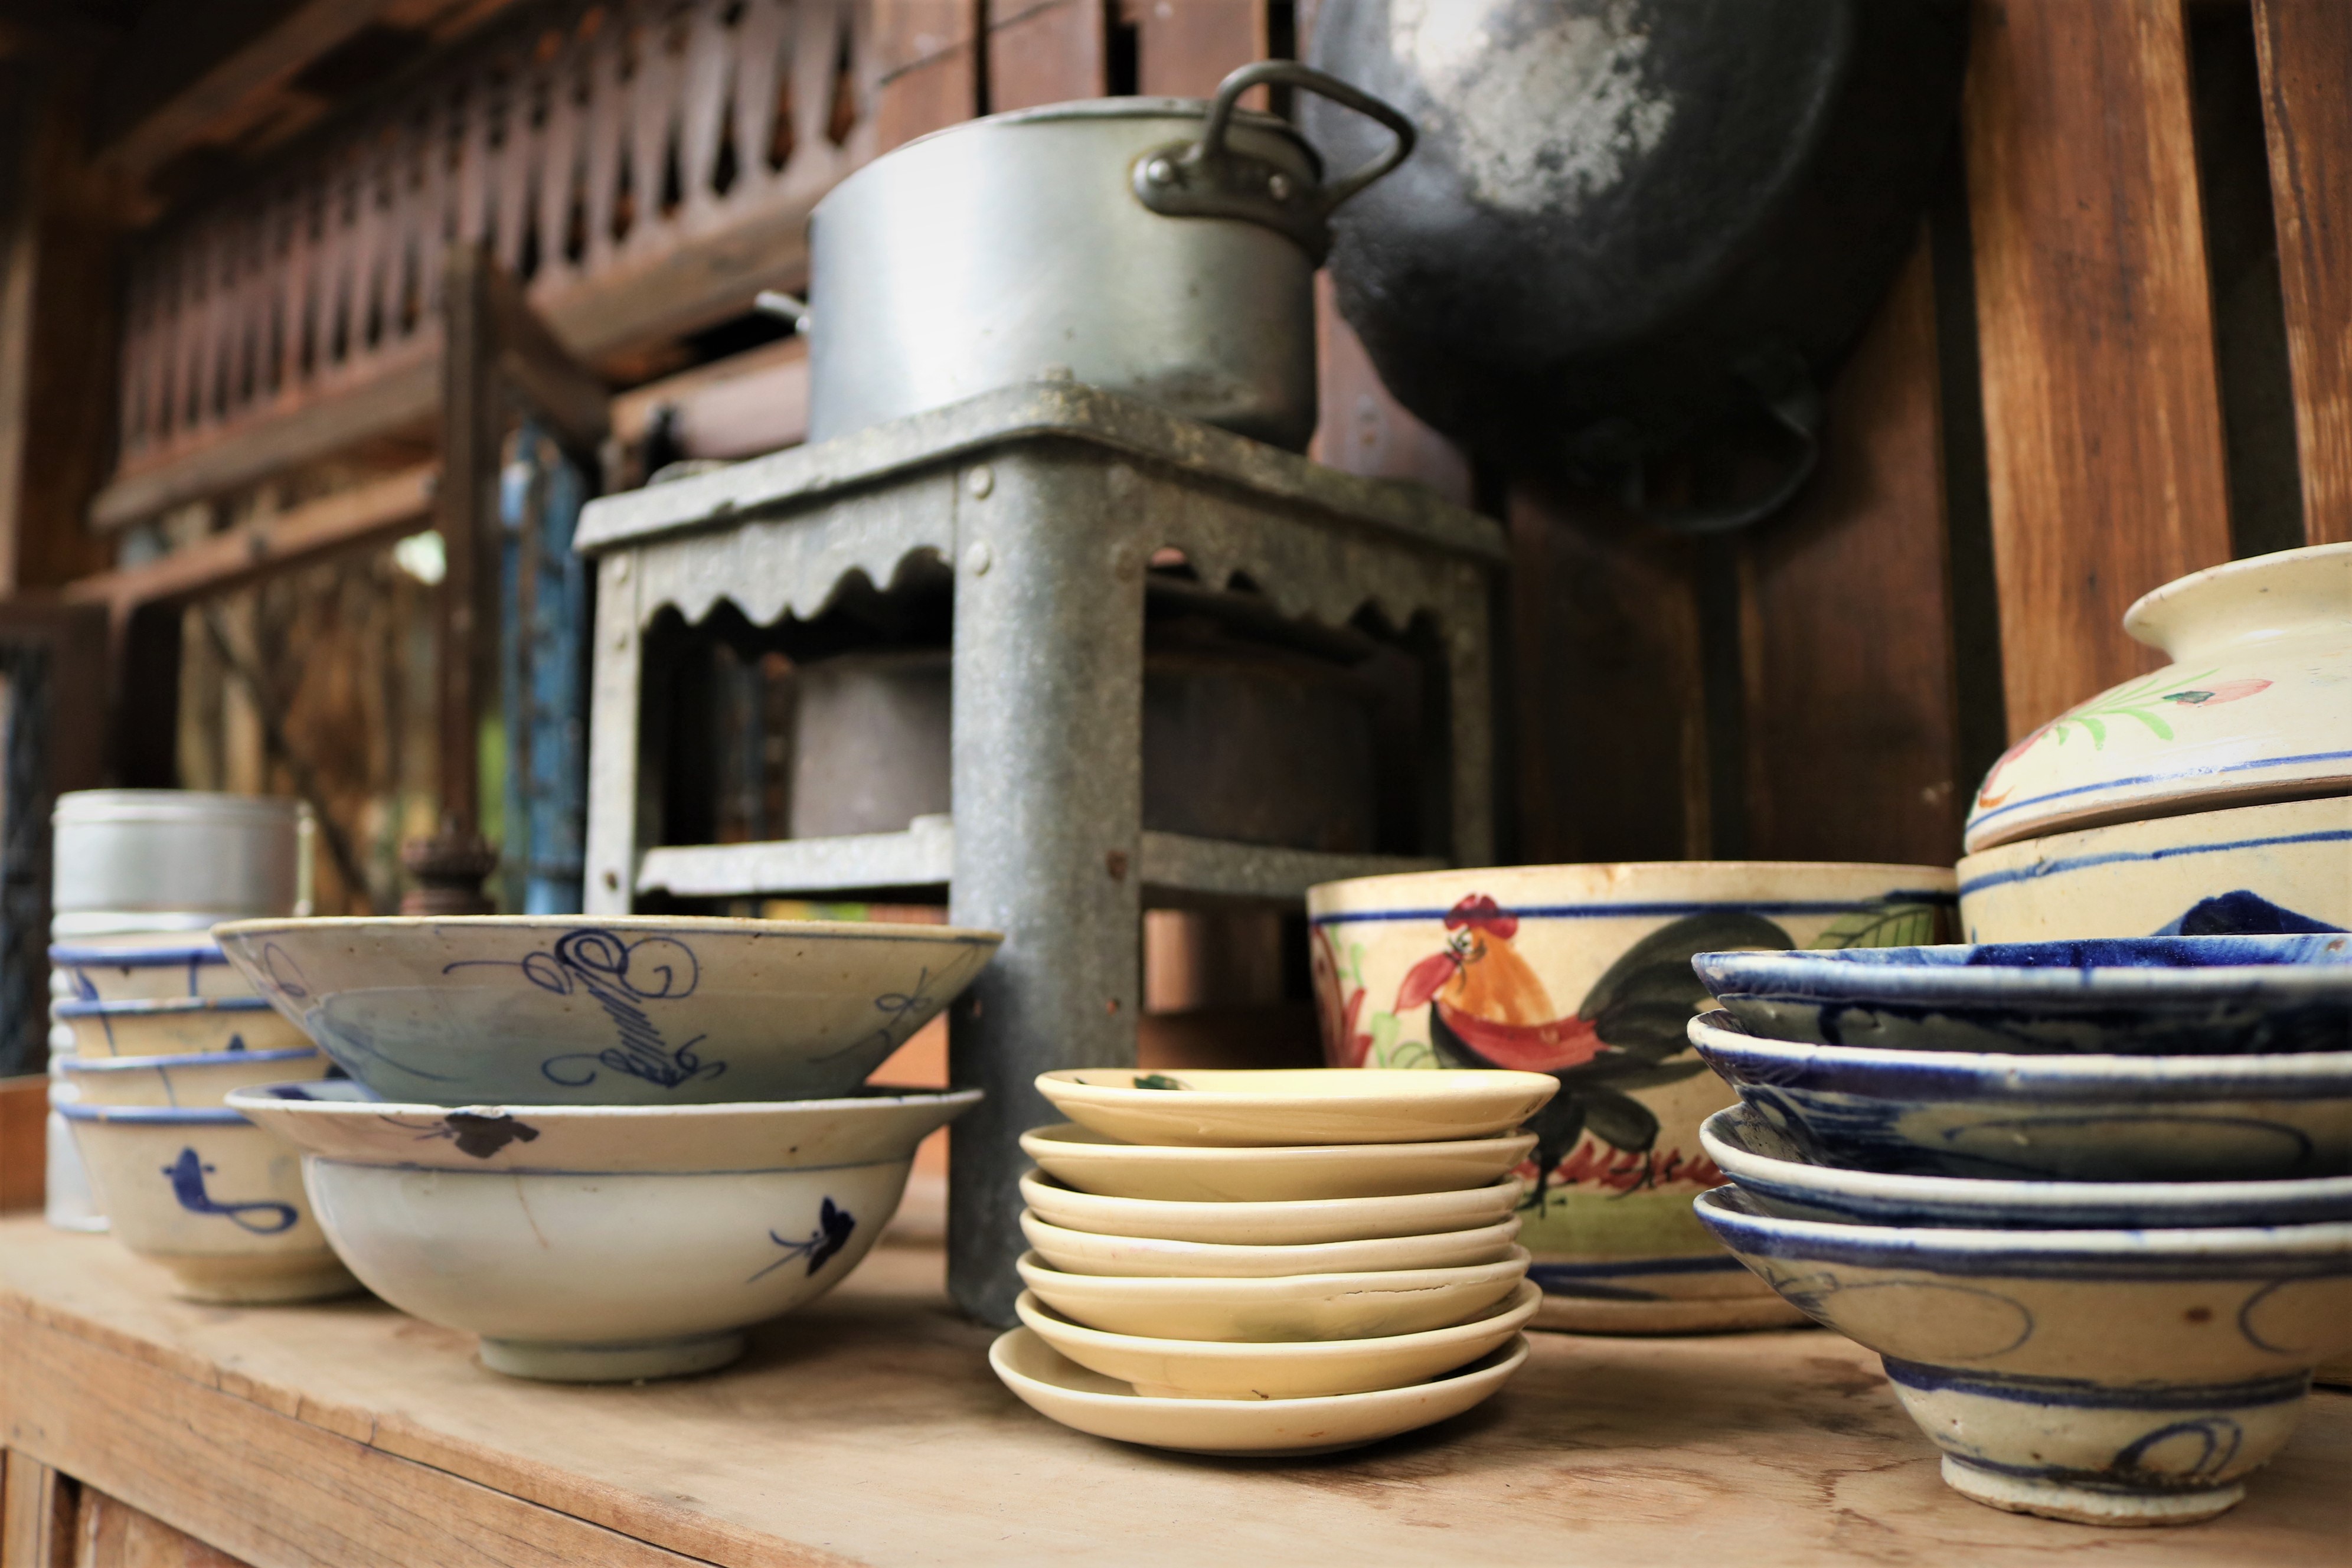 A set of vintage dishes Hiep collected from a house in the Mekong Delta at Lua Sai Gon café in Phu Nhuan District, Ho Chi Minh City. Photo: Hoang An / Tuoi Tre News